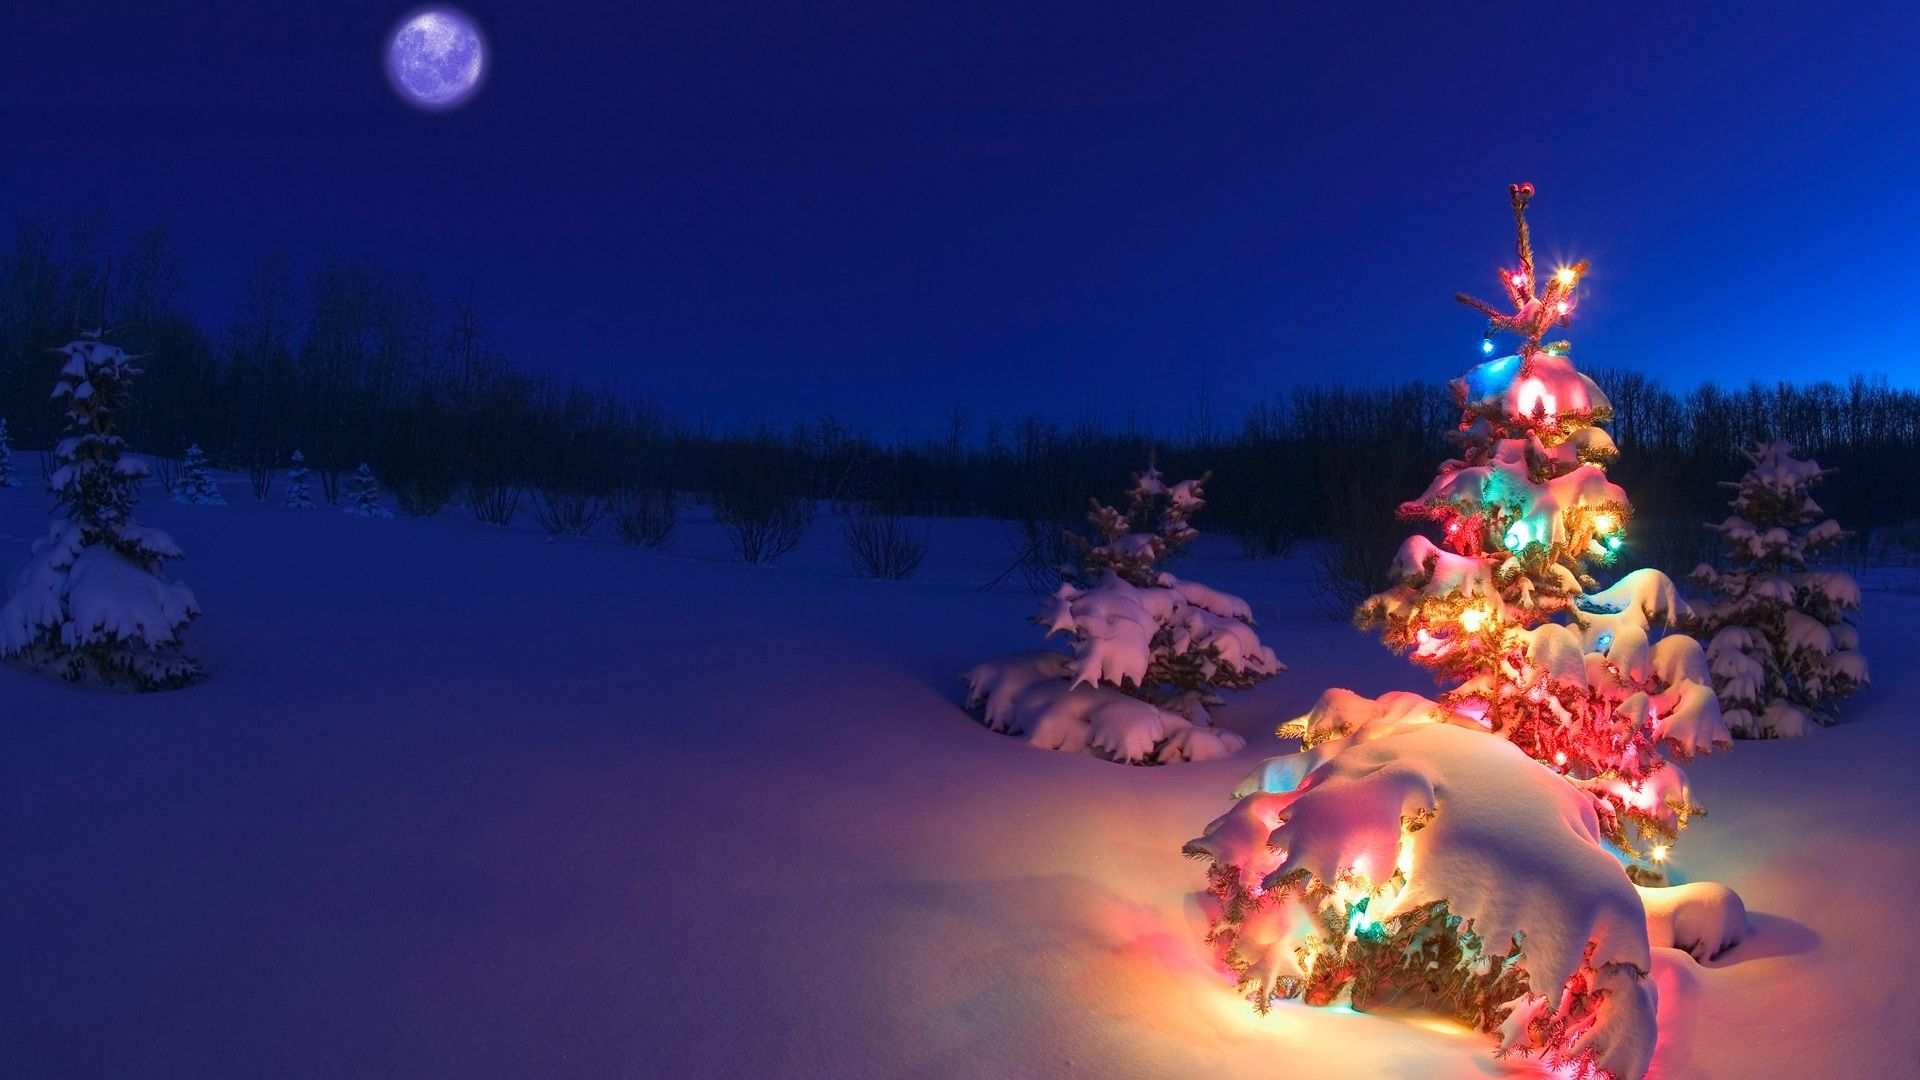 Wallpapers Beautiful Christmas tree, lights, snow, night 1920x1080 Full HD 2K Picture, Image